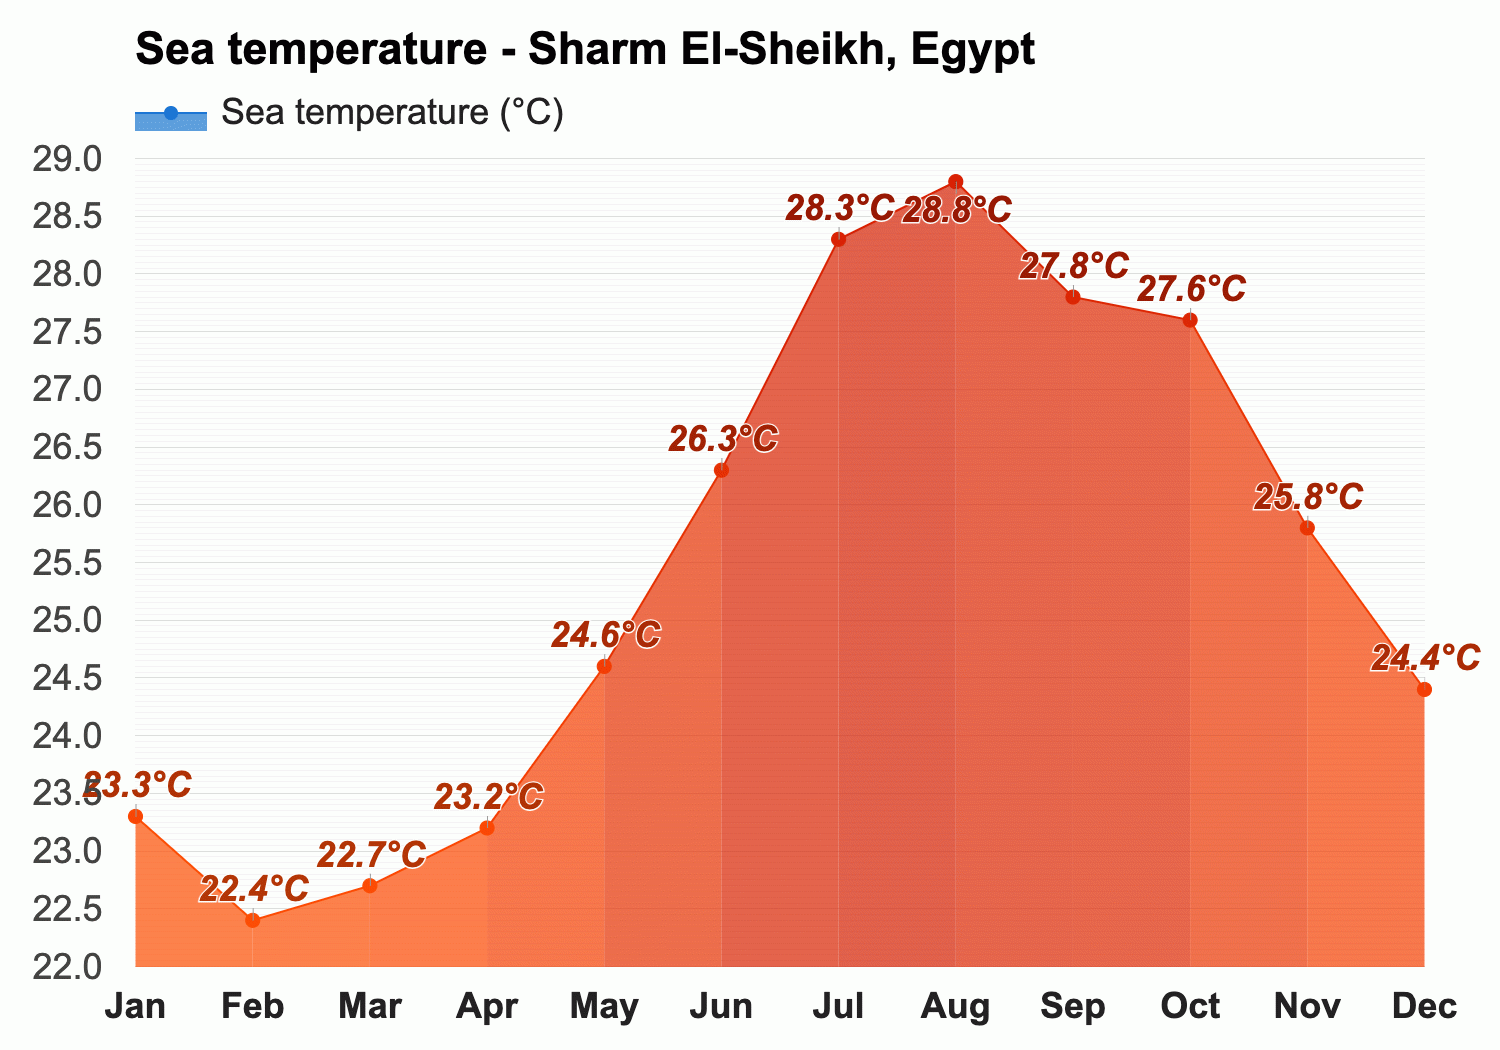 Sharm El-Sheikh, Egypt - March weather forecast and climate information |  Weather Atlas